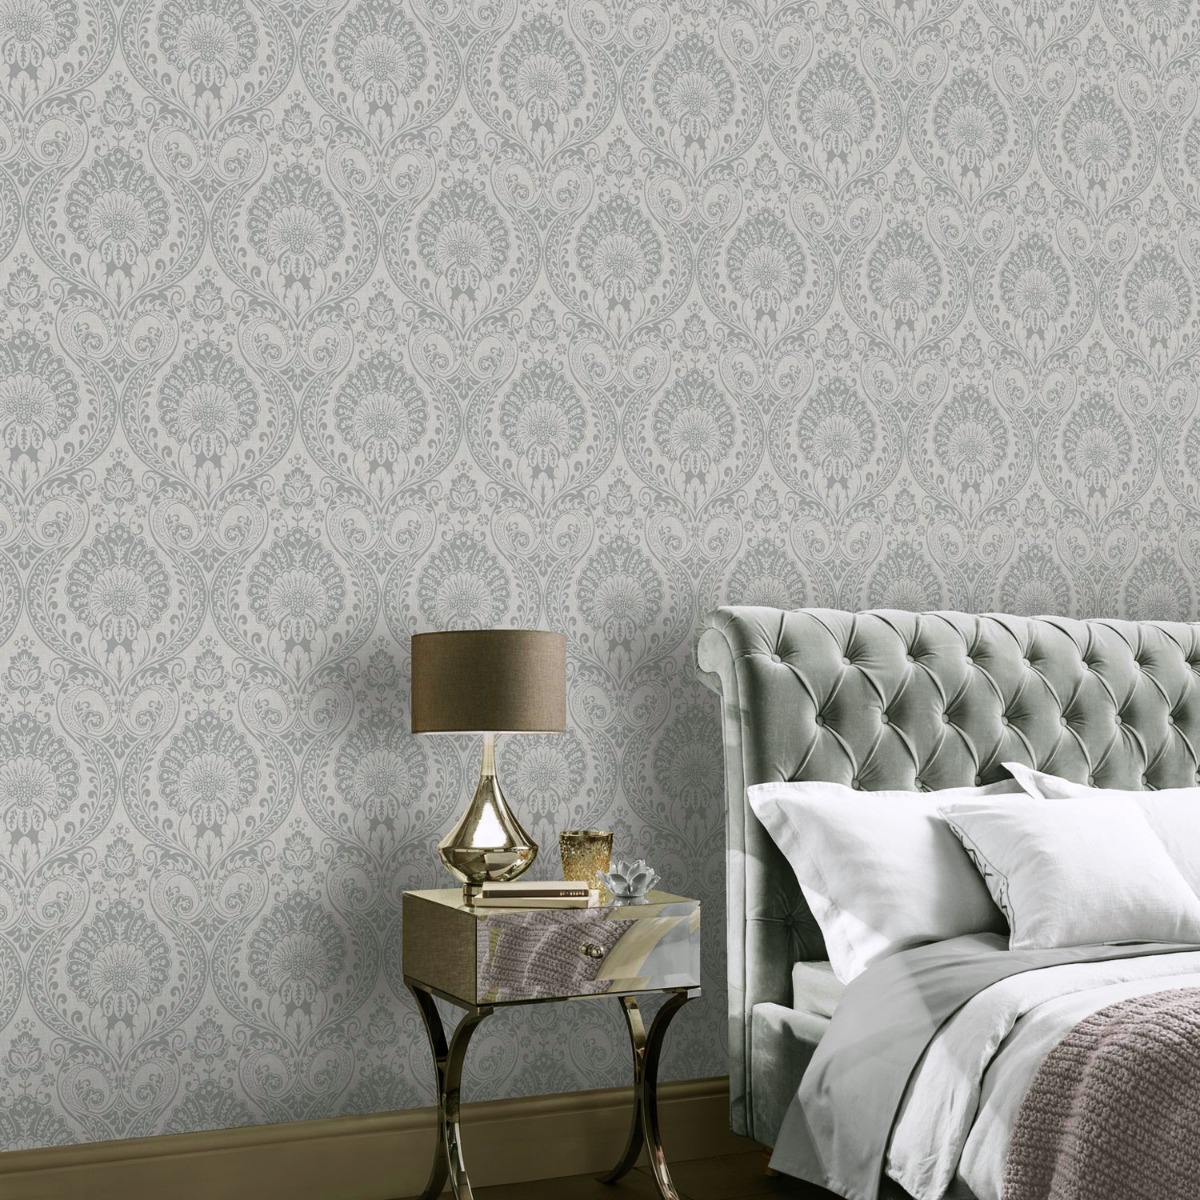 How To Shop Wallpaper By Room: Master Bedroom